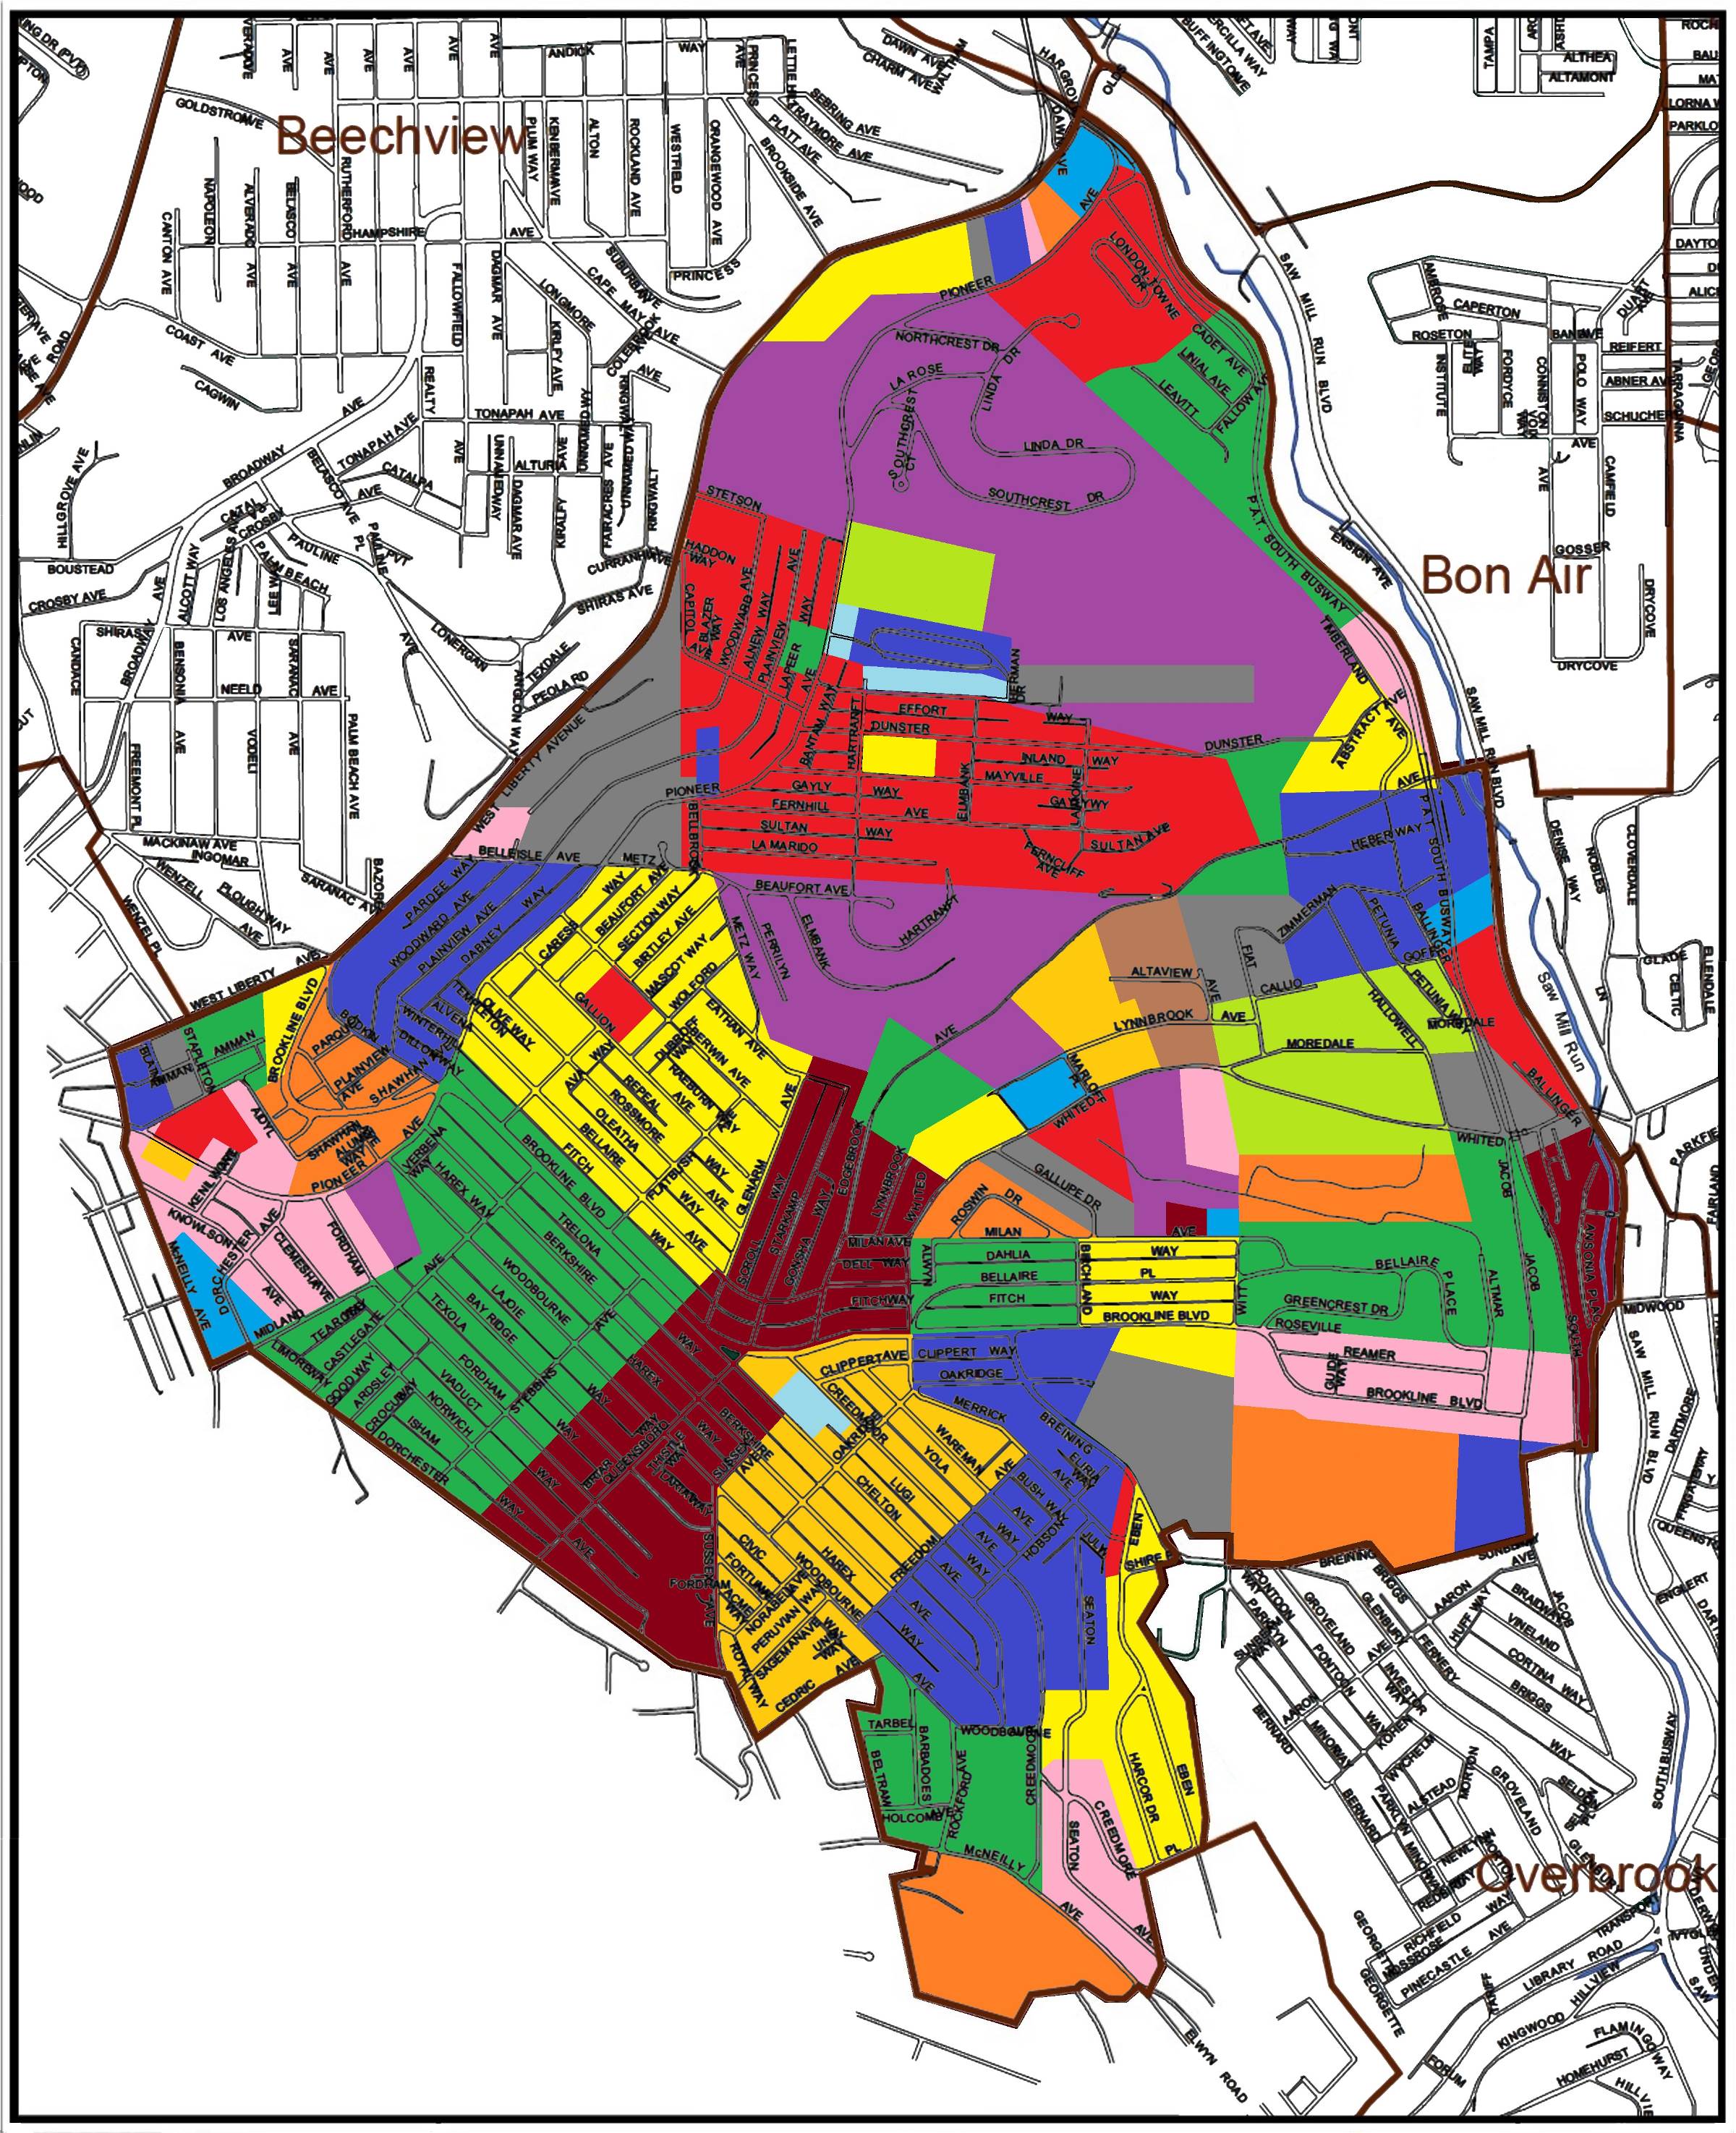 Map showing the 72 subdivisions in Brookline as of 1950.